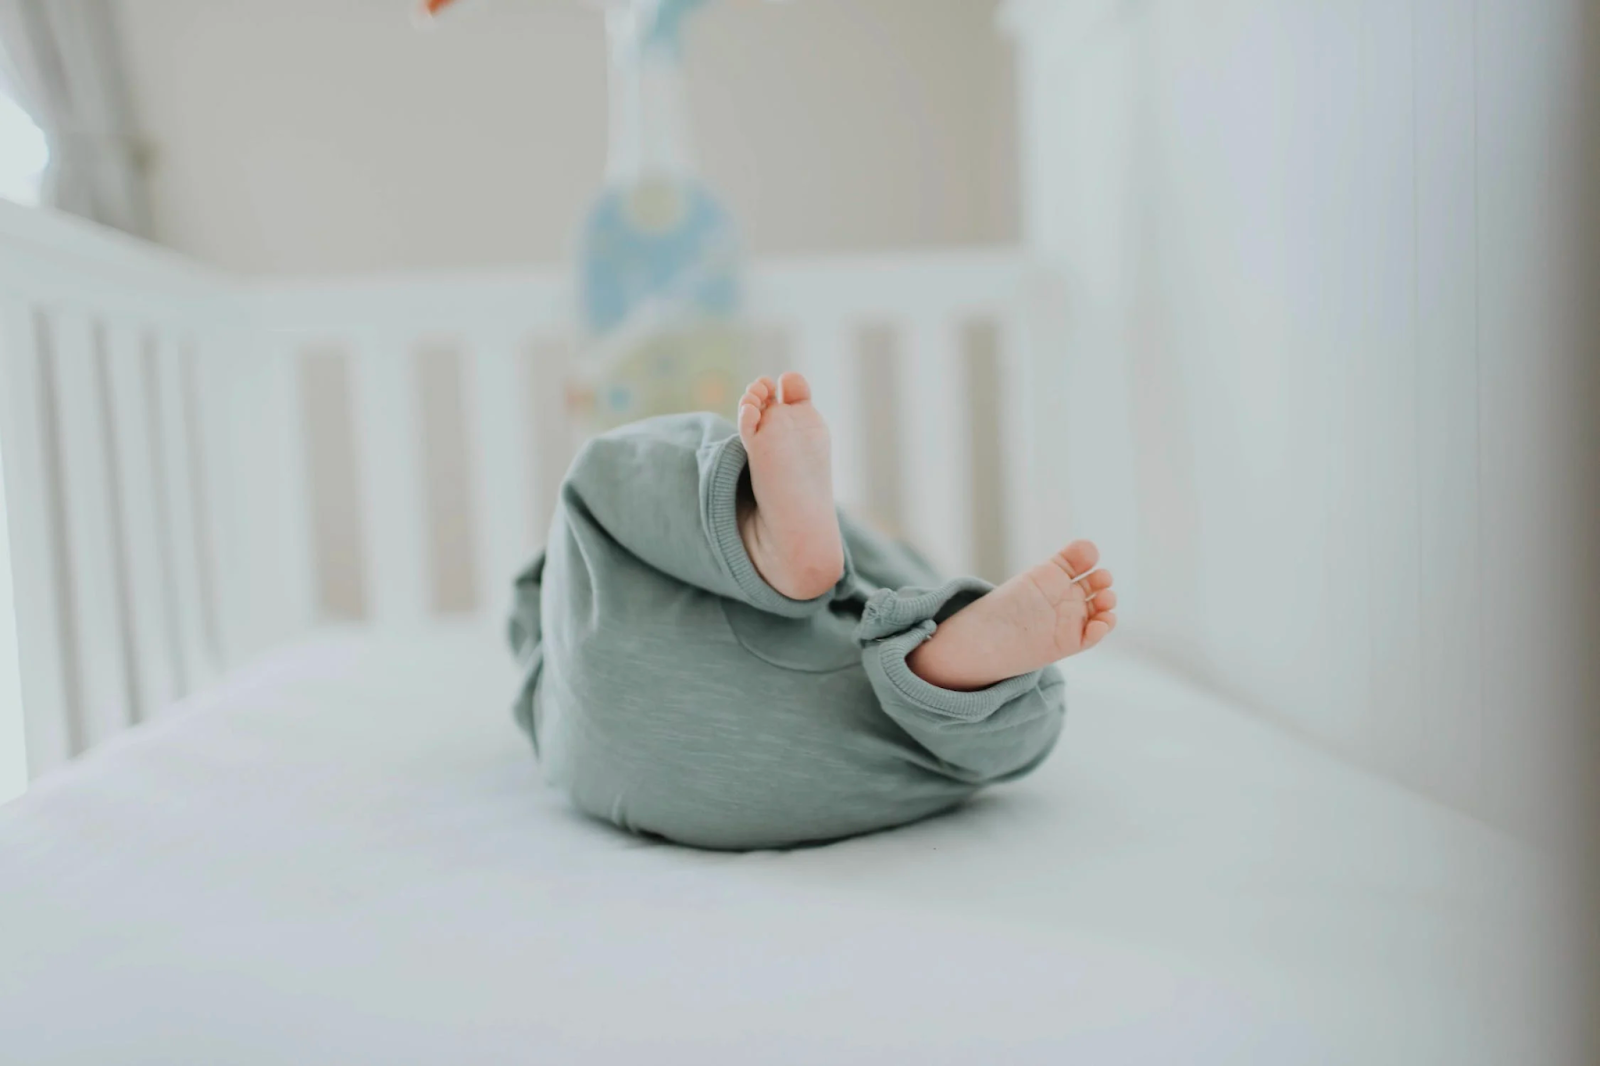 Placing an infant on their back is a key recommendation for safe sleep practices.